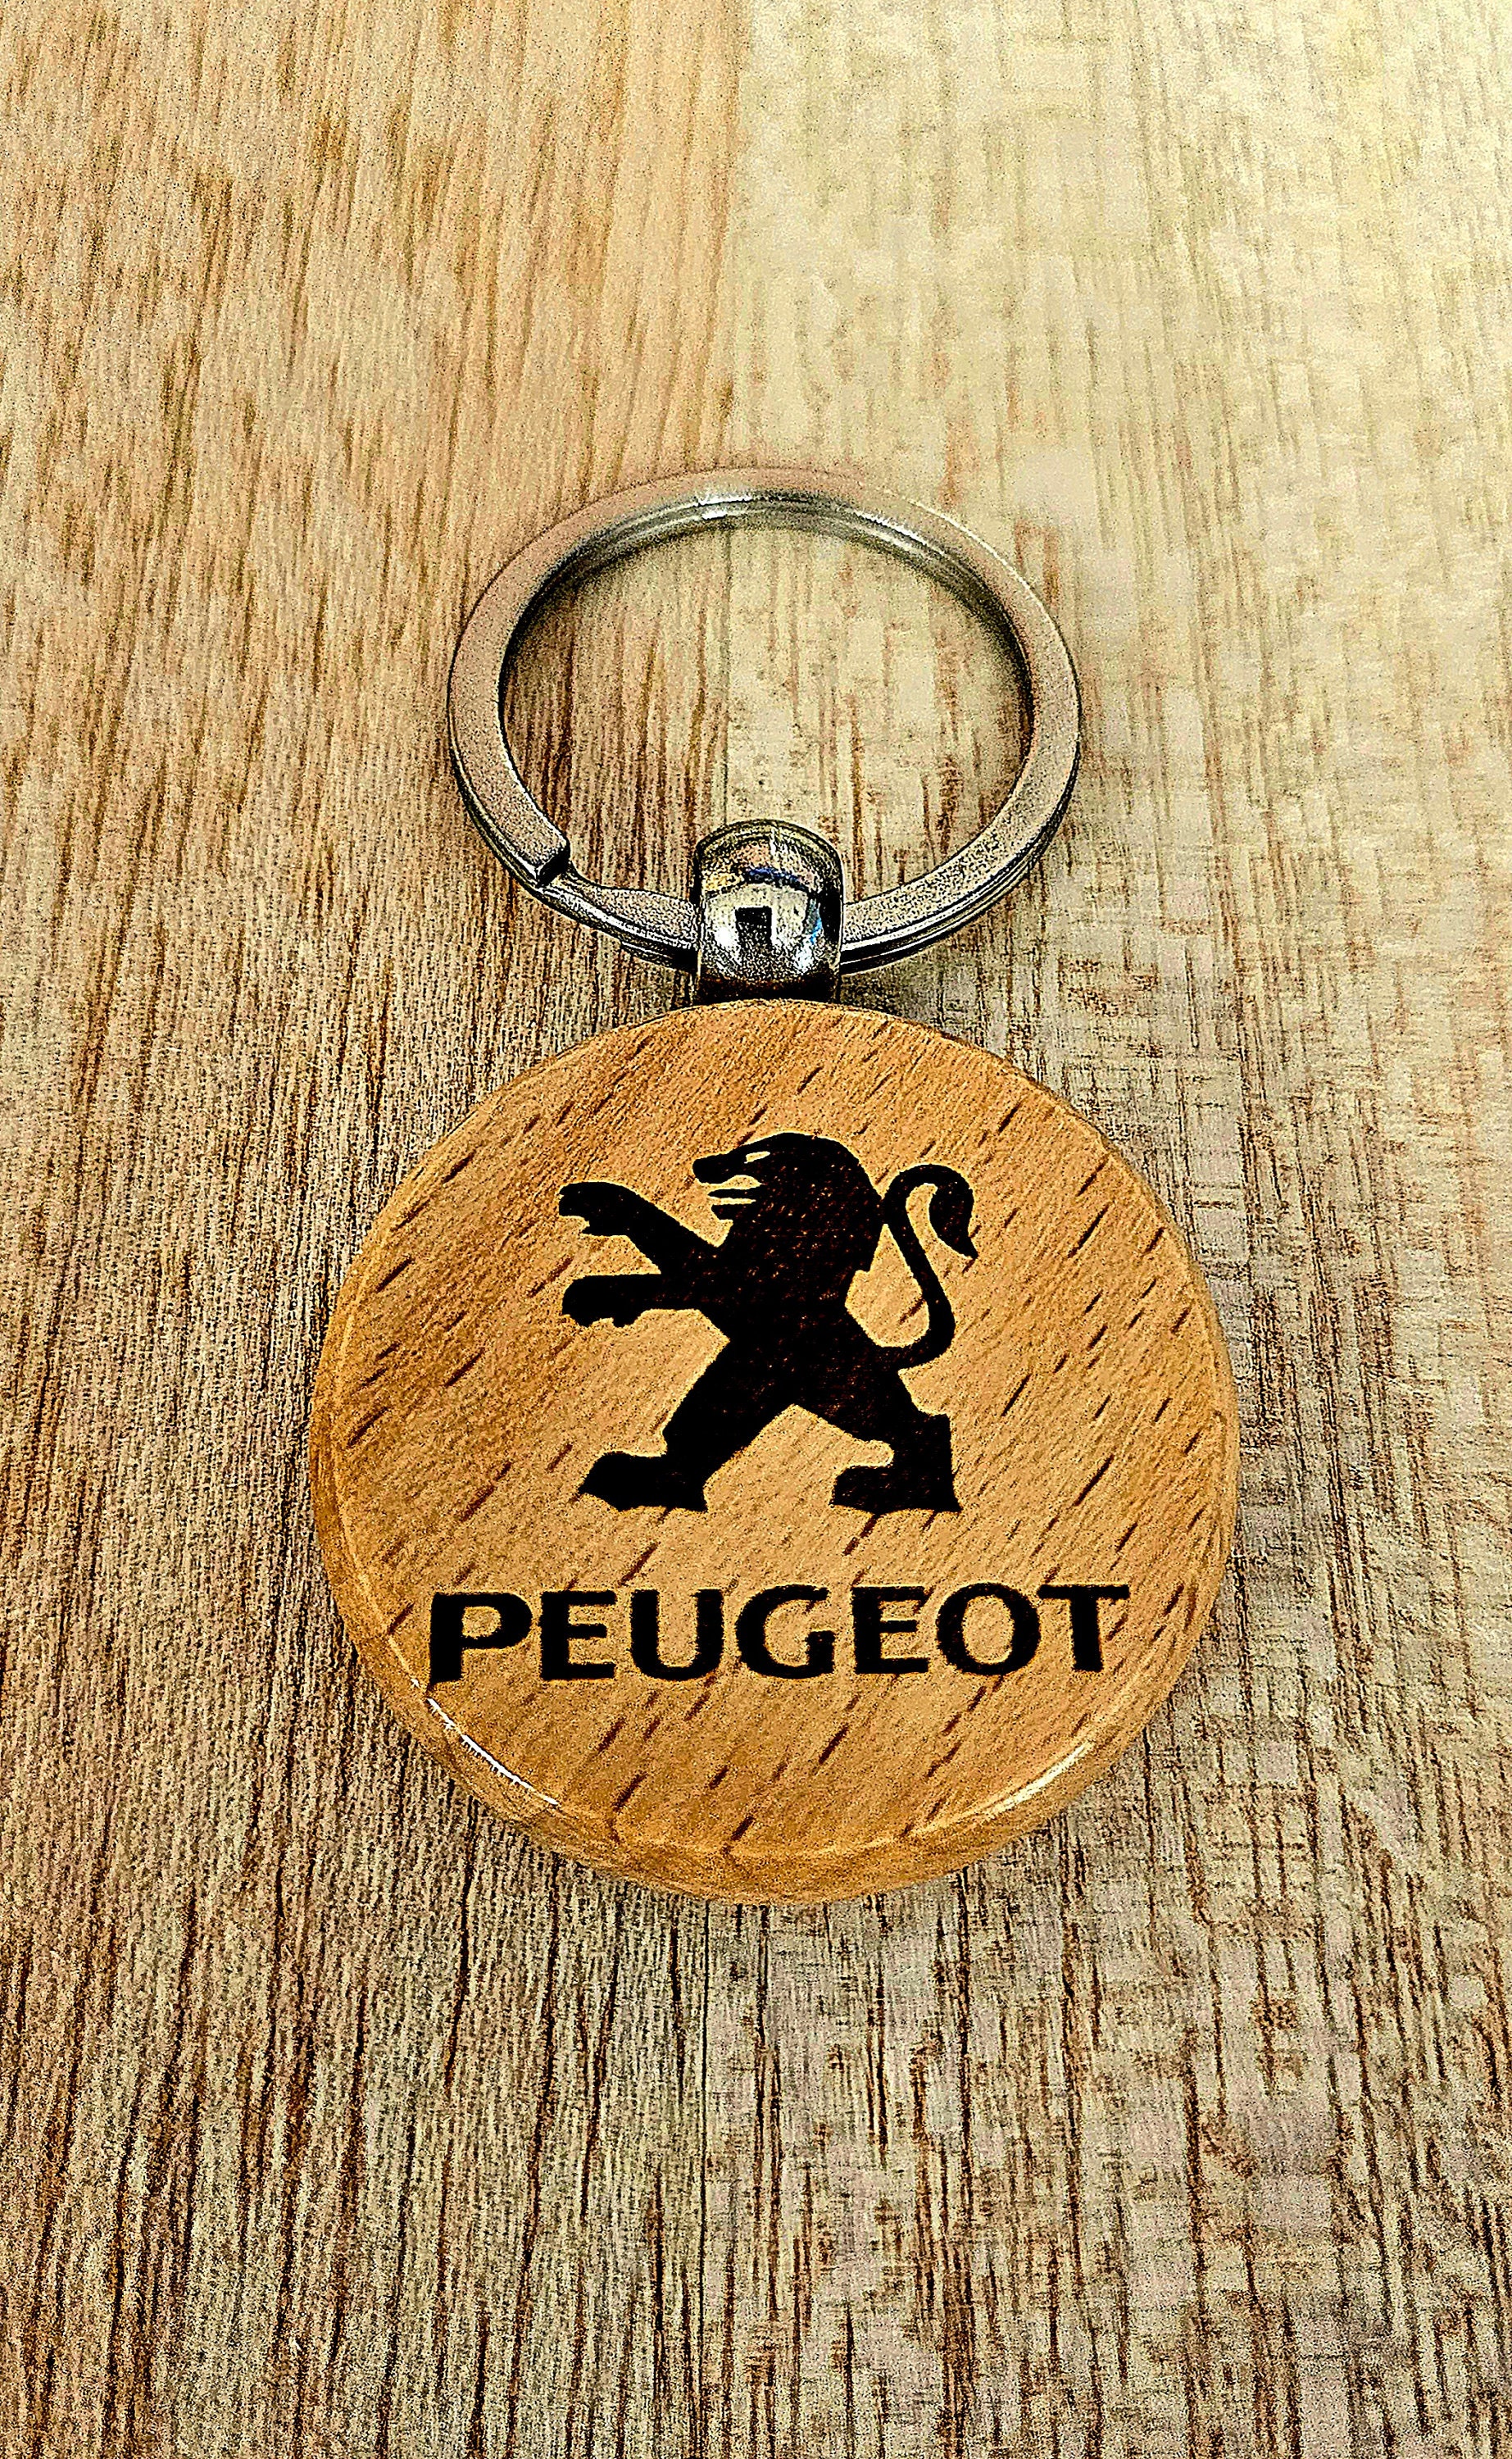 Of Top Fashion Peugeot Metal Leather Biker Keychain Llaveros Chaveiro Car  Emblem Key Holders From Xcdfs6, $10.25